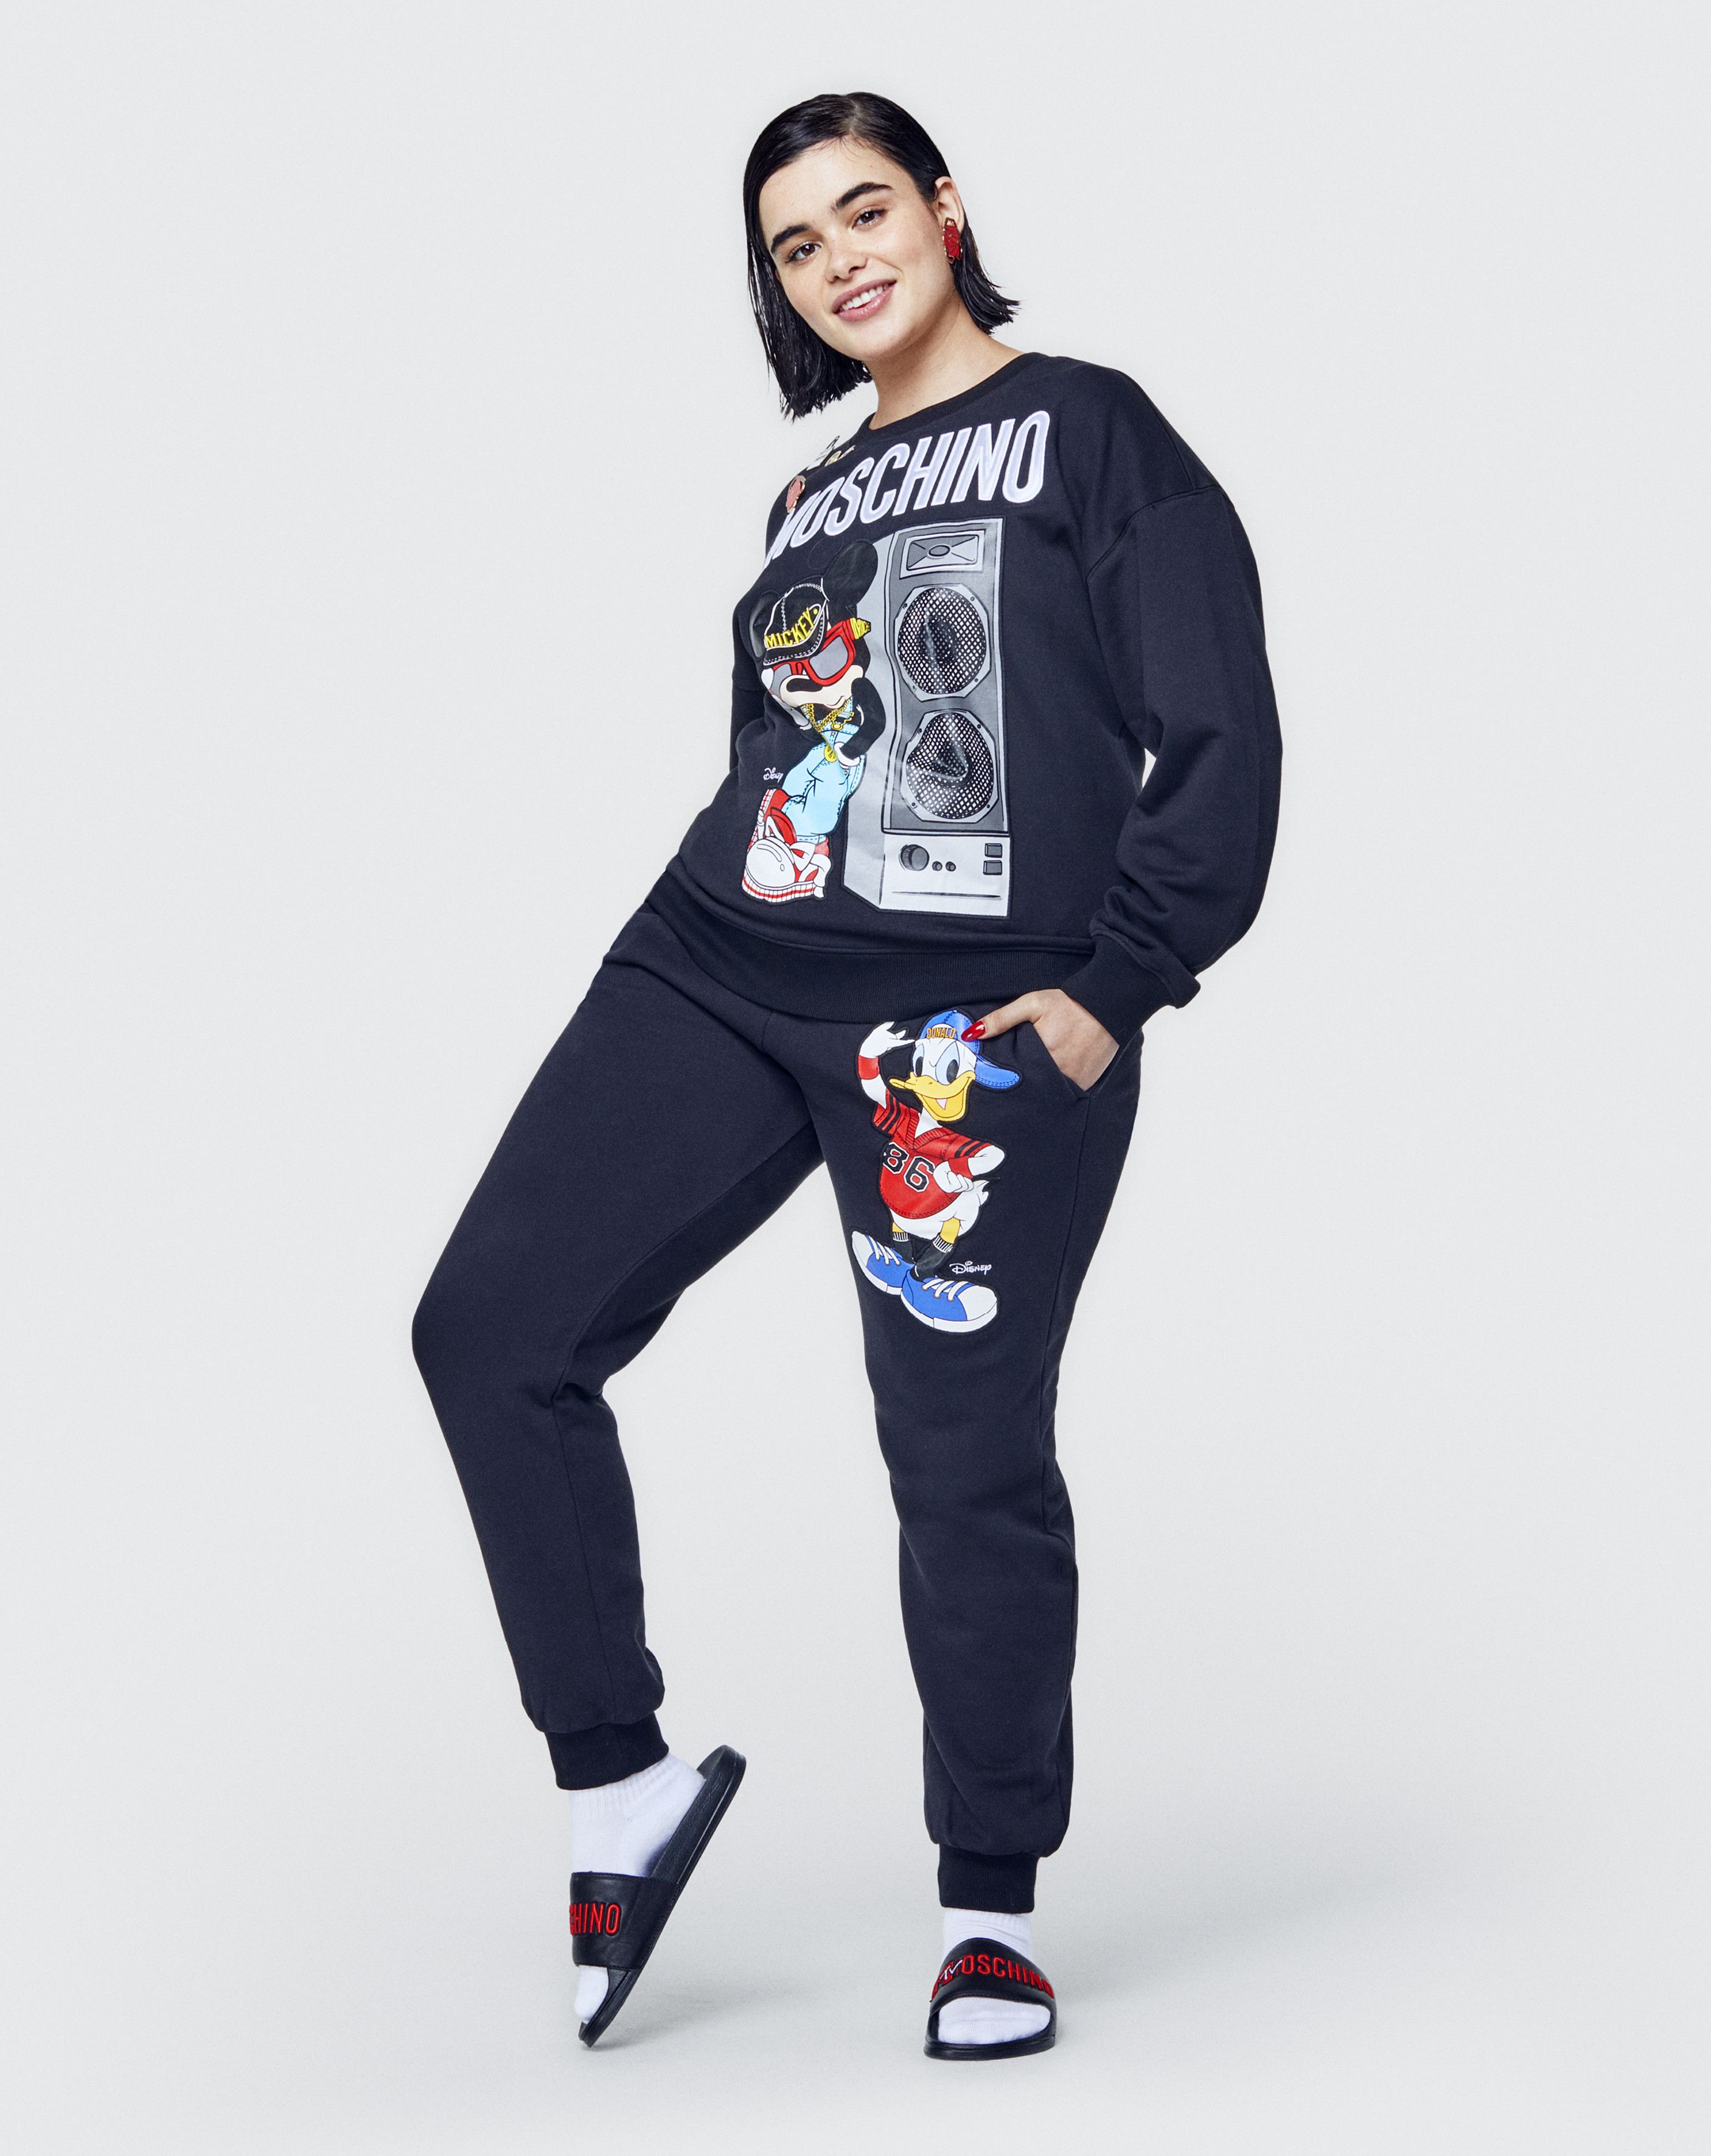 moschino h&m mickey mouse